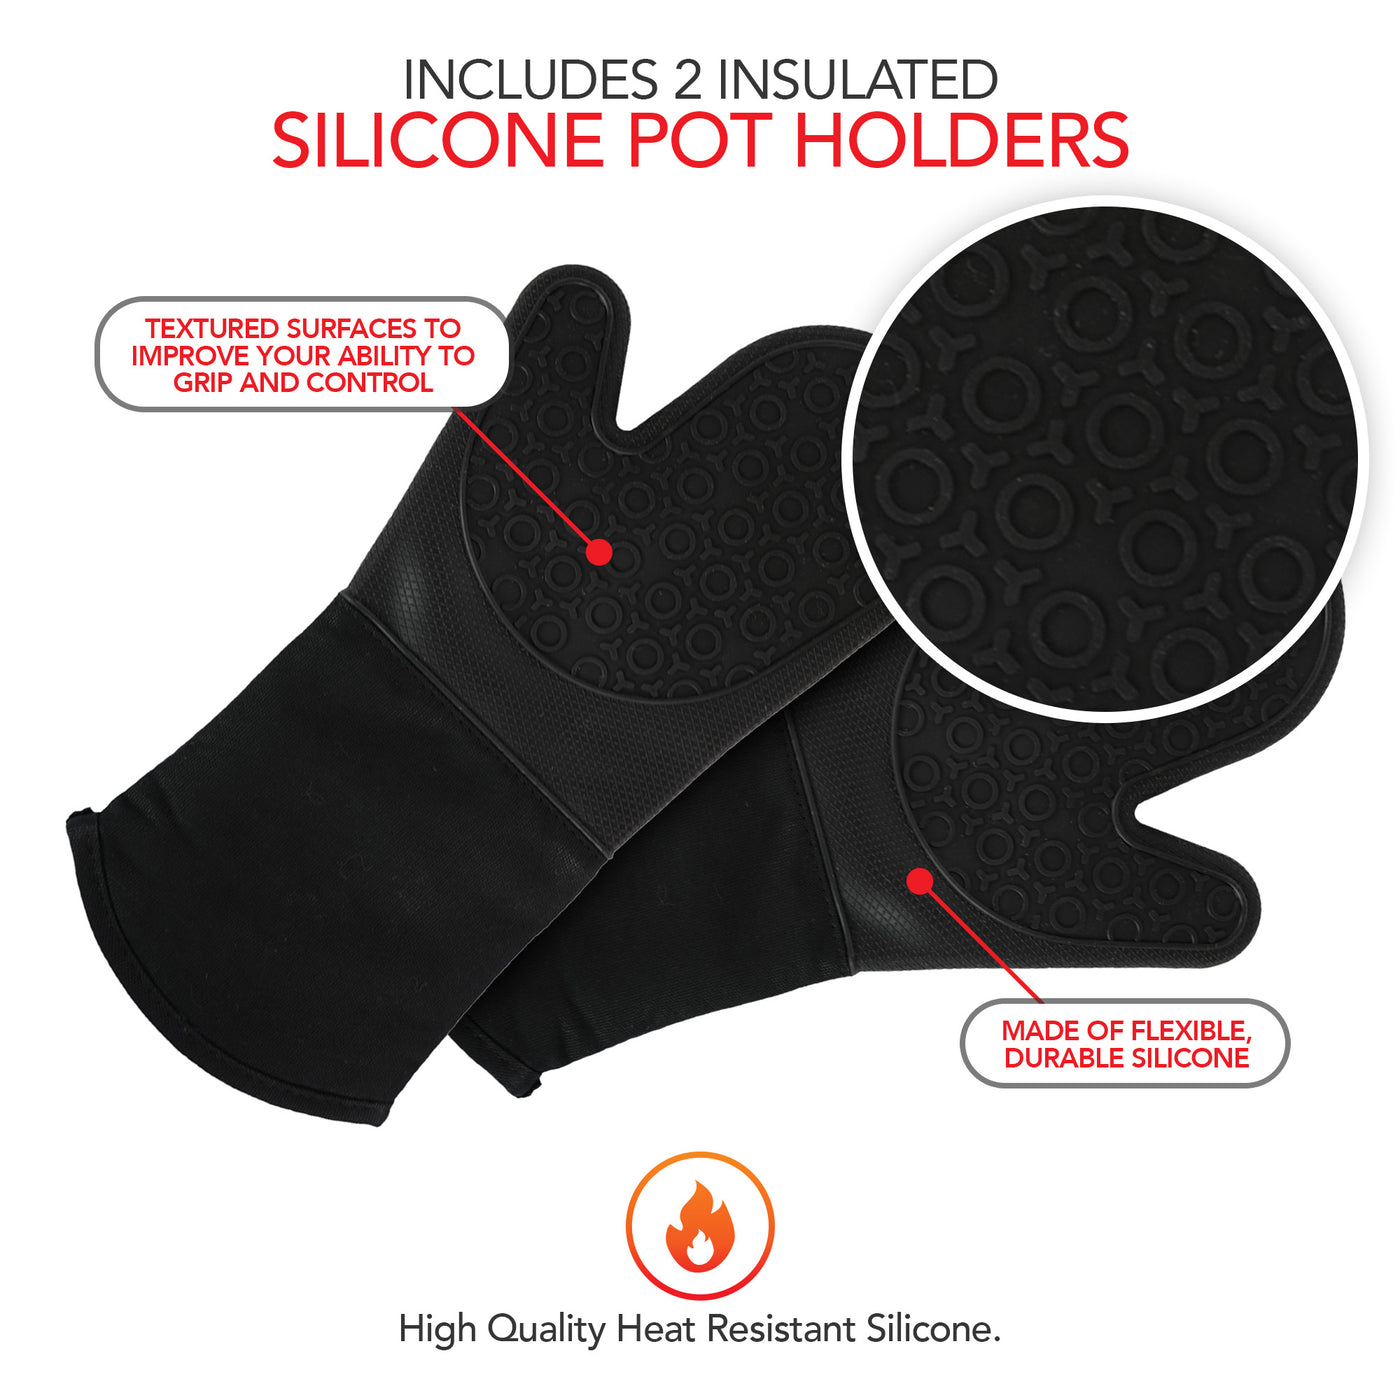 Silicone Oven Mitts and Potholders (4-Piece Set), Kitchen Counter - Advanced Heat Resistant Pot Holders, Non-Slip Textured Grip Oven Mitt - Black